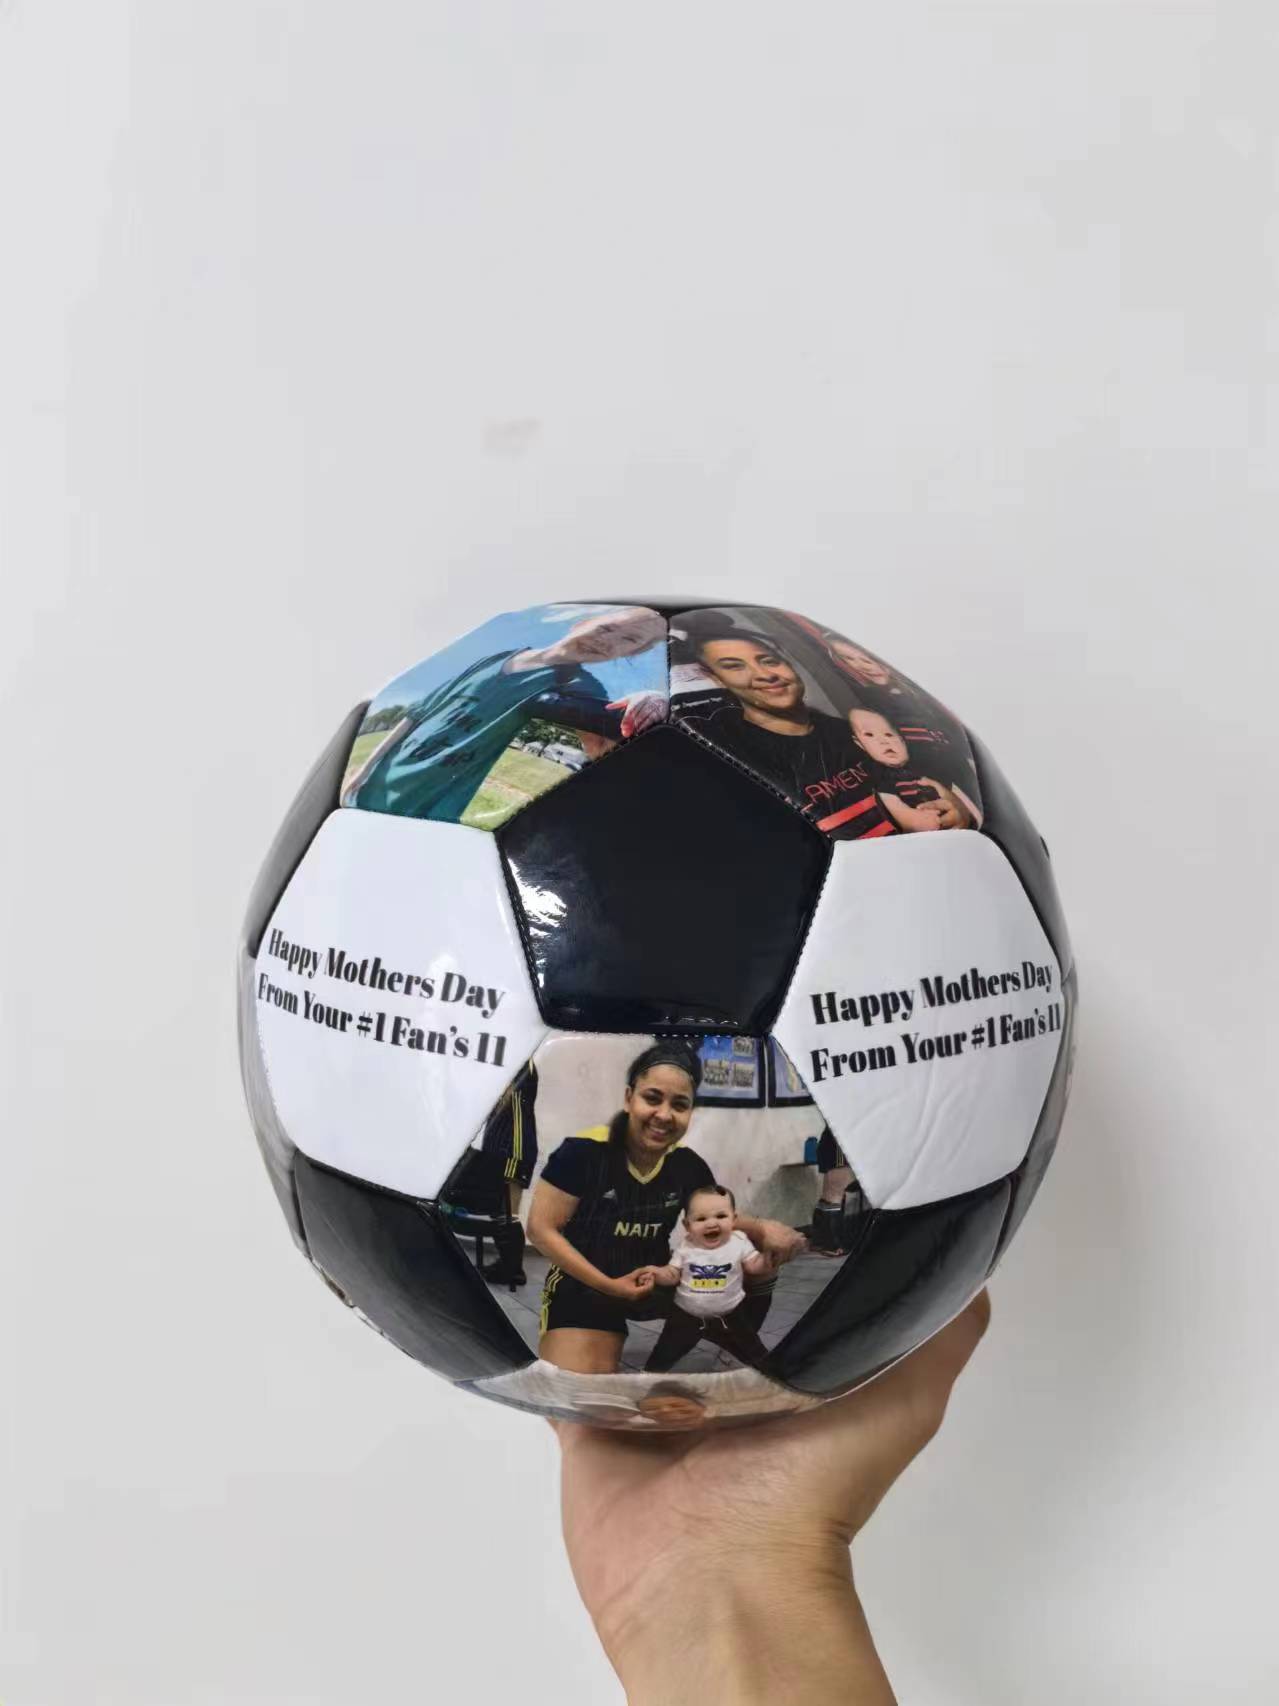 Customized Soccer Balls Size 5 Personalized with Name, Photo, Text, Gifts for Daughters, Son, Granddaughters, Grandson, Boyfriend, Girlfriend, Soccer Fans